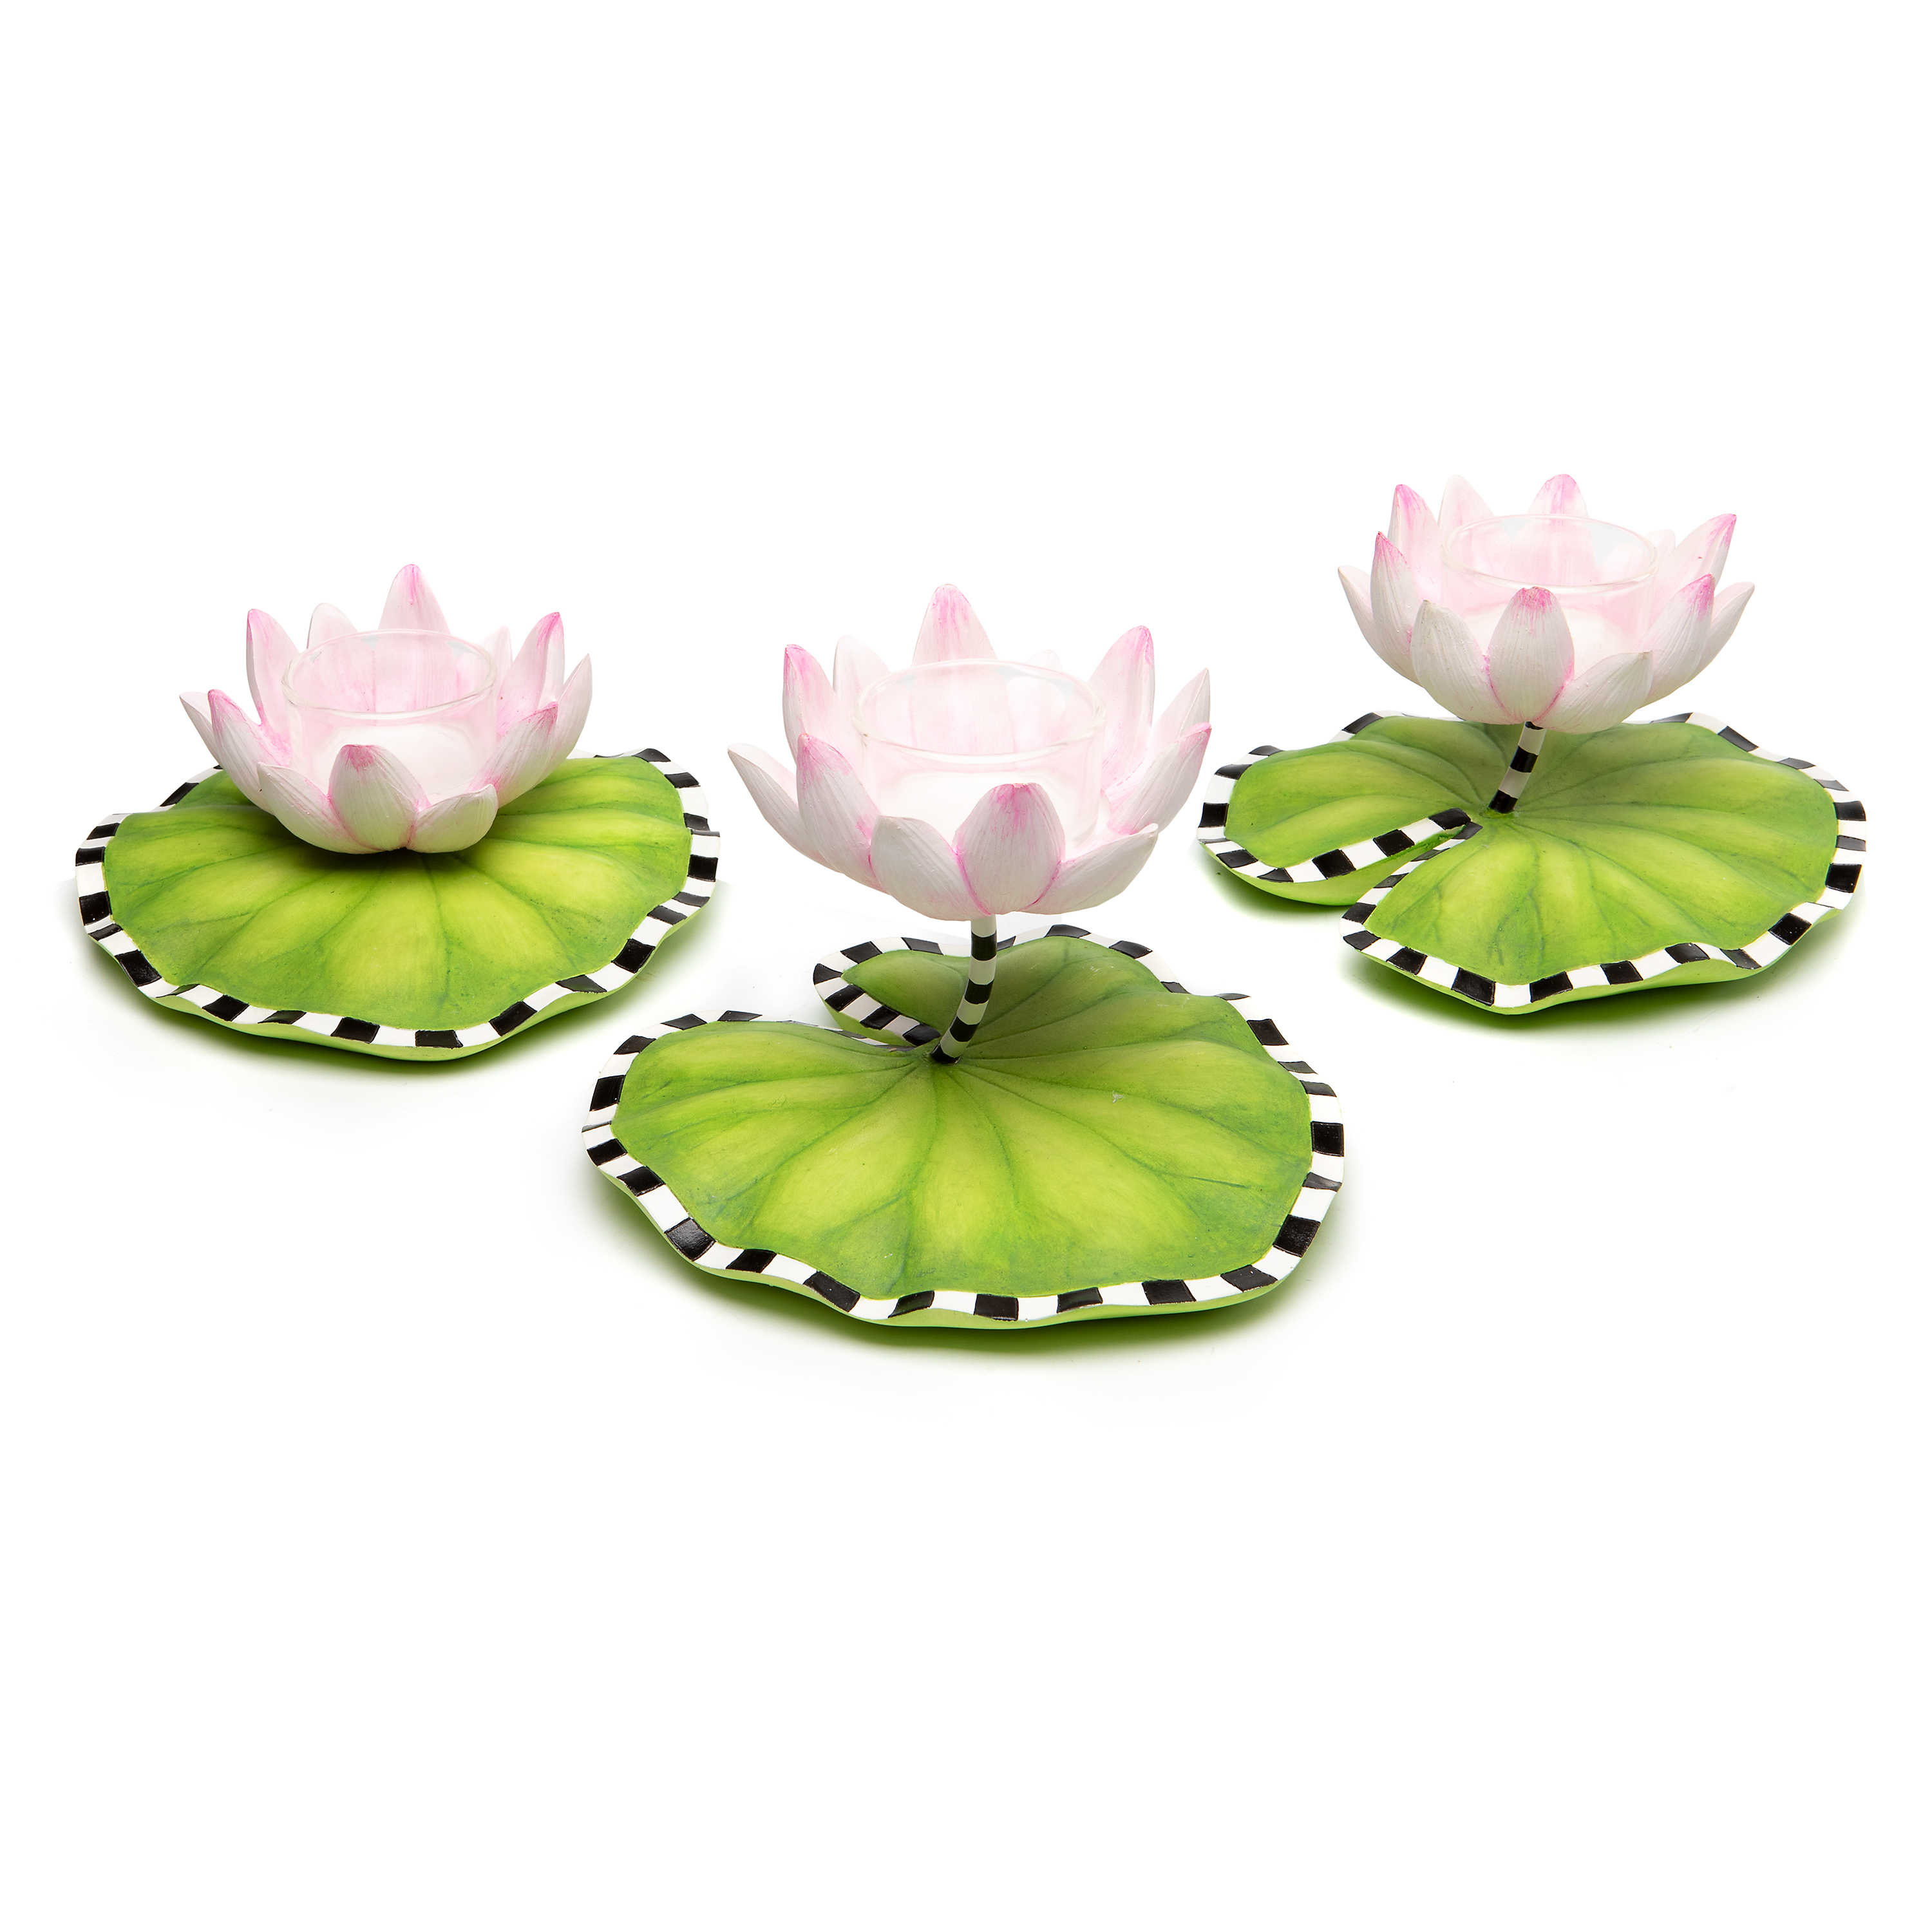 Patience Brewster Lily Pond Candle Holder - Set of 3 mackenzie-childs Panama 0